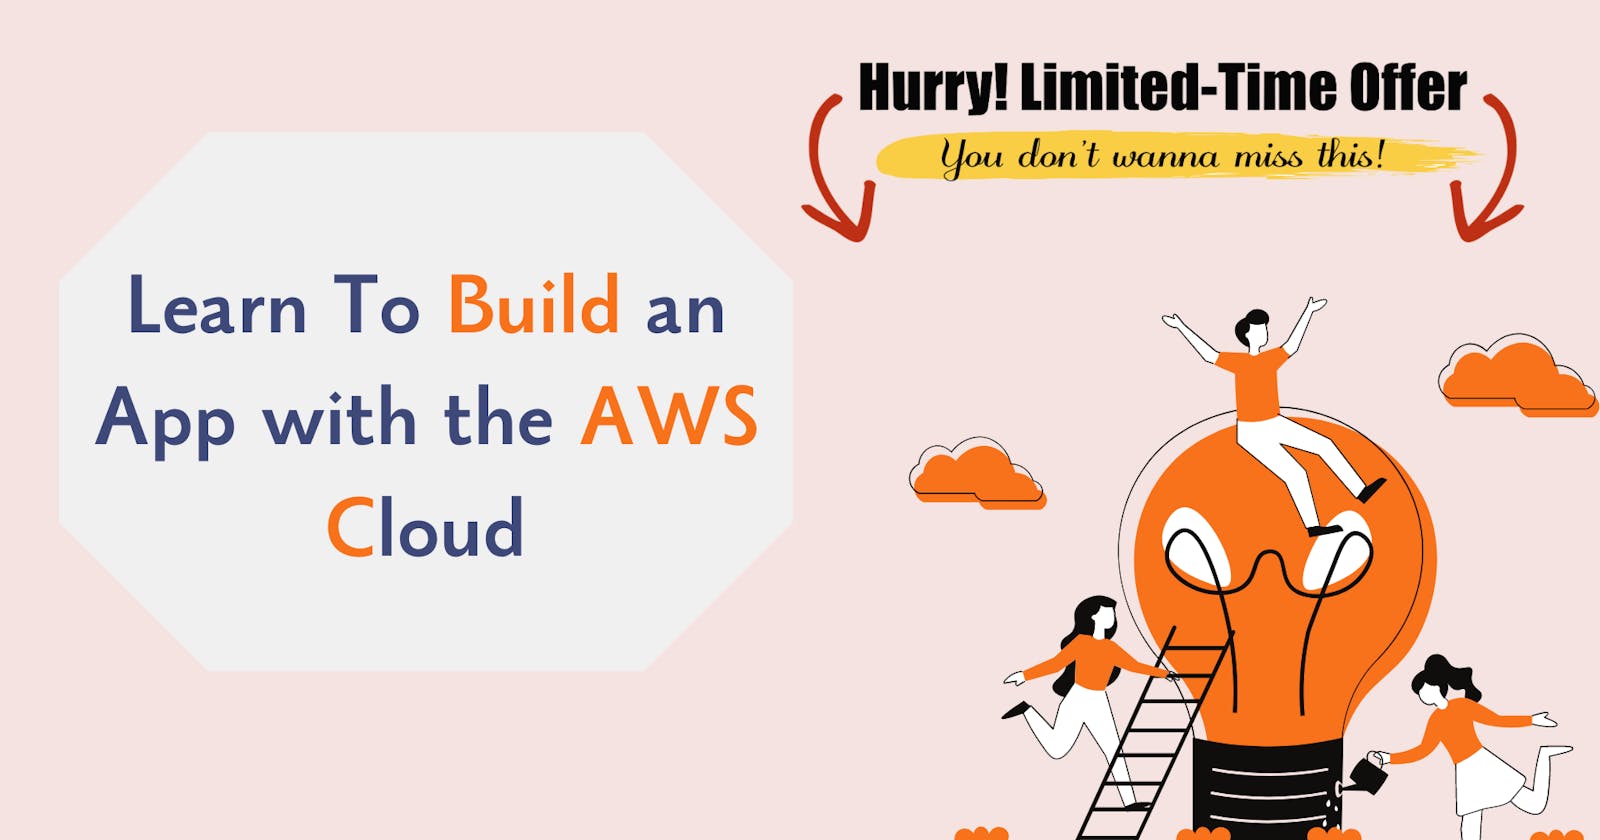 Learn To Build an App with the AWS Cloud